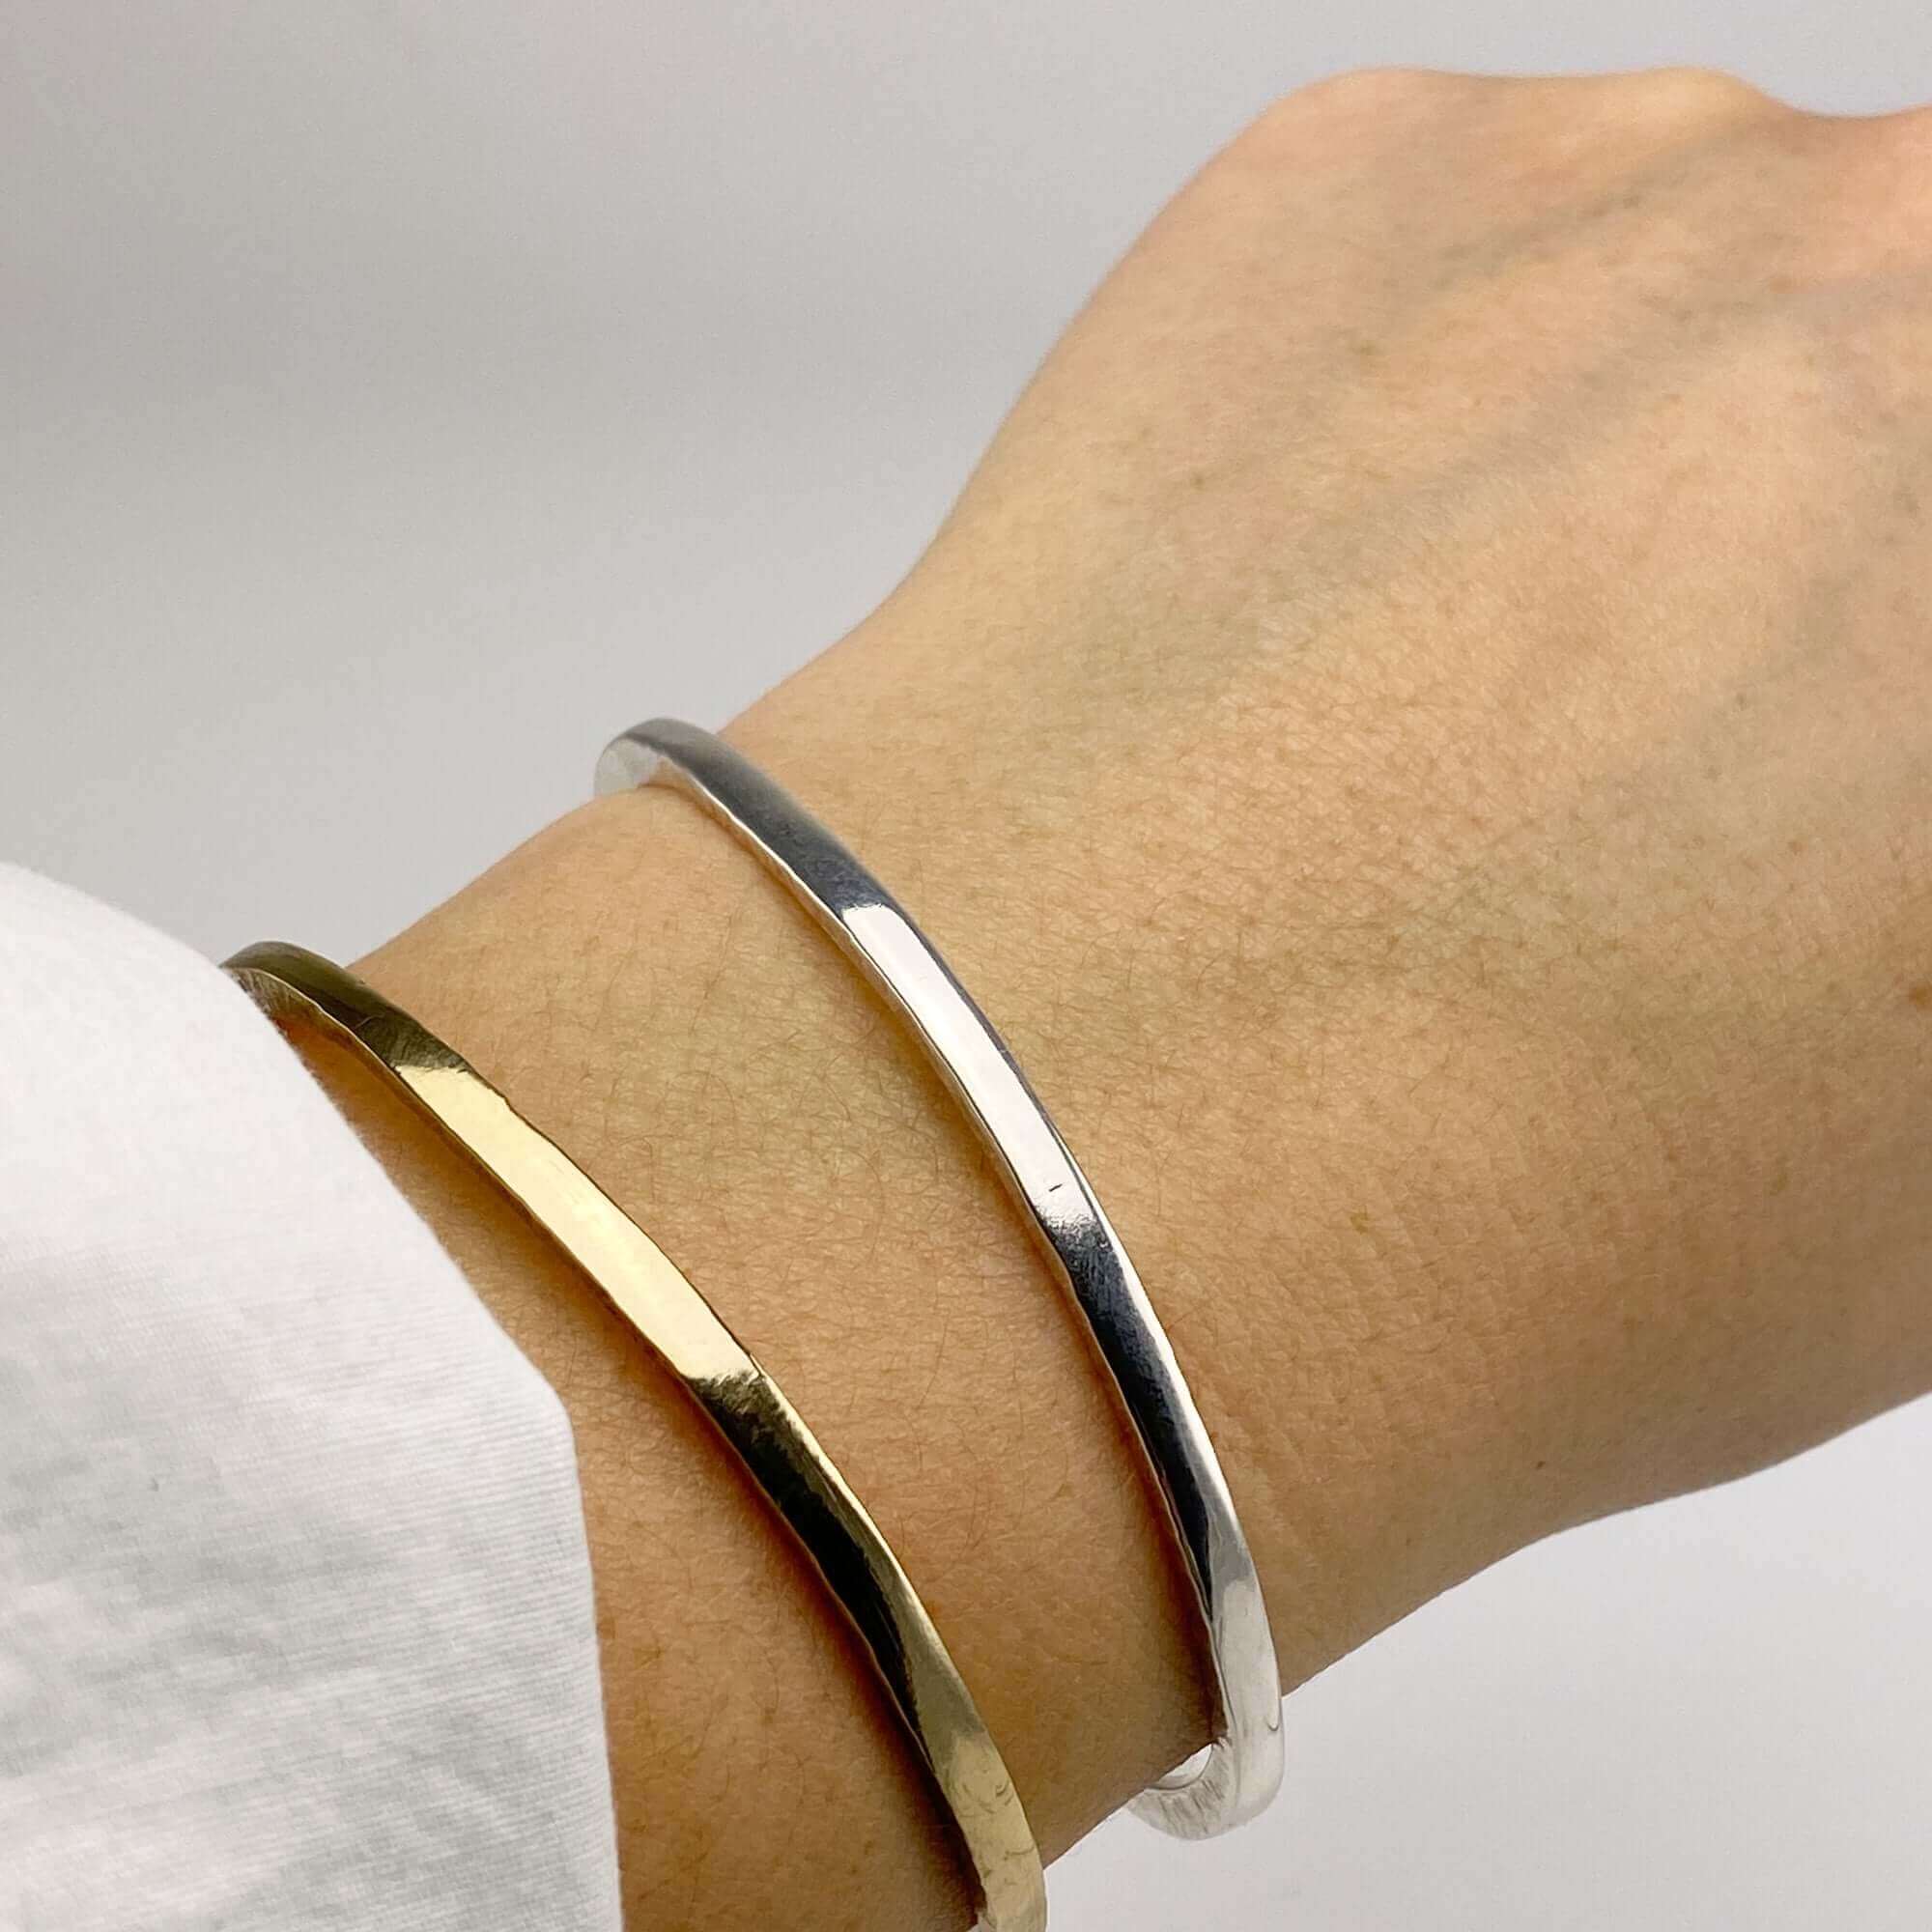 Of Flat Round Solid Gold Bangle Bracelet With Vacuum Plated 24K Gold And  Pure Brass FB506 Slap & Snap Braces From Silver_store, $3.5 | DHgate.Com